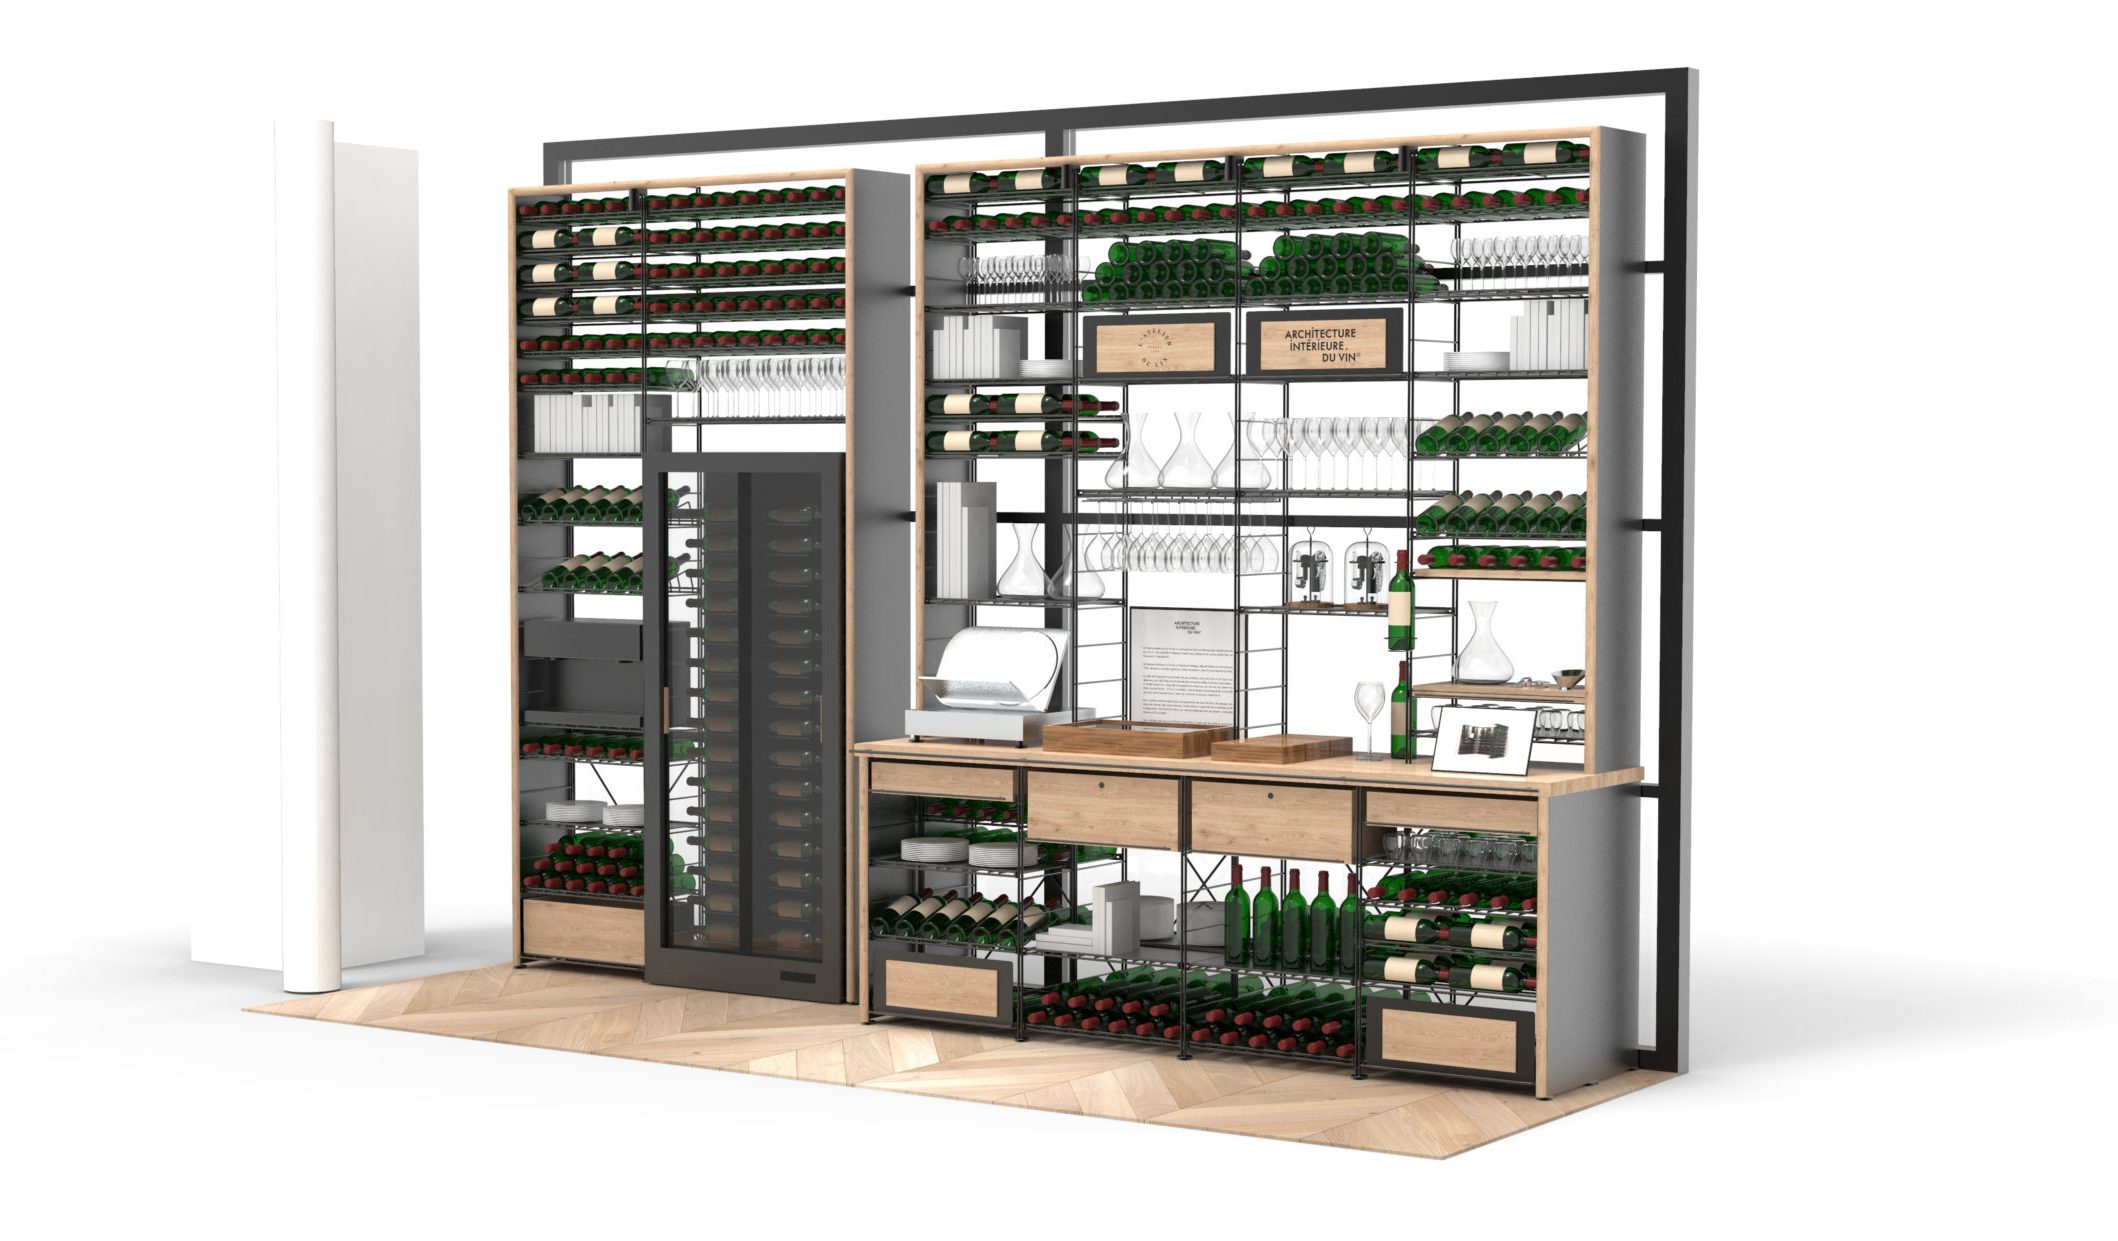 A Built In Refrigerated Wine Cabinet Good Or Bad Idea Architecture Intérieure Du Vin